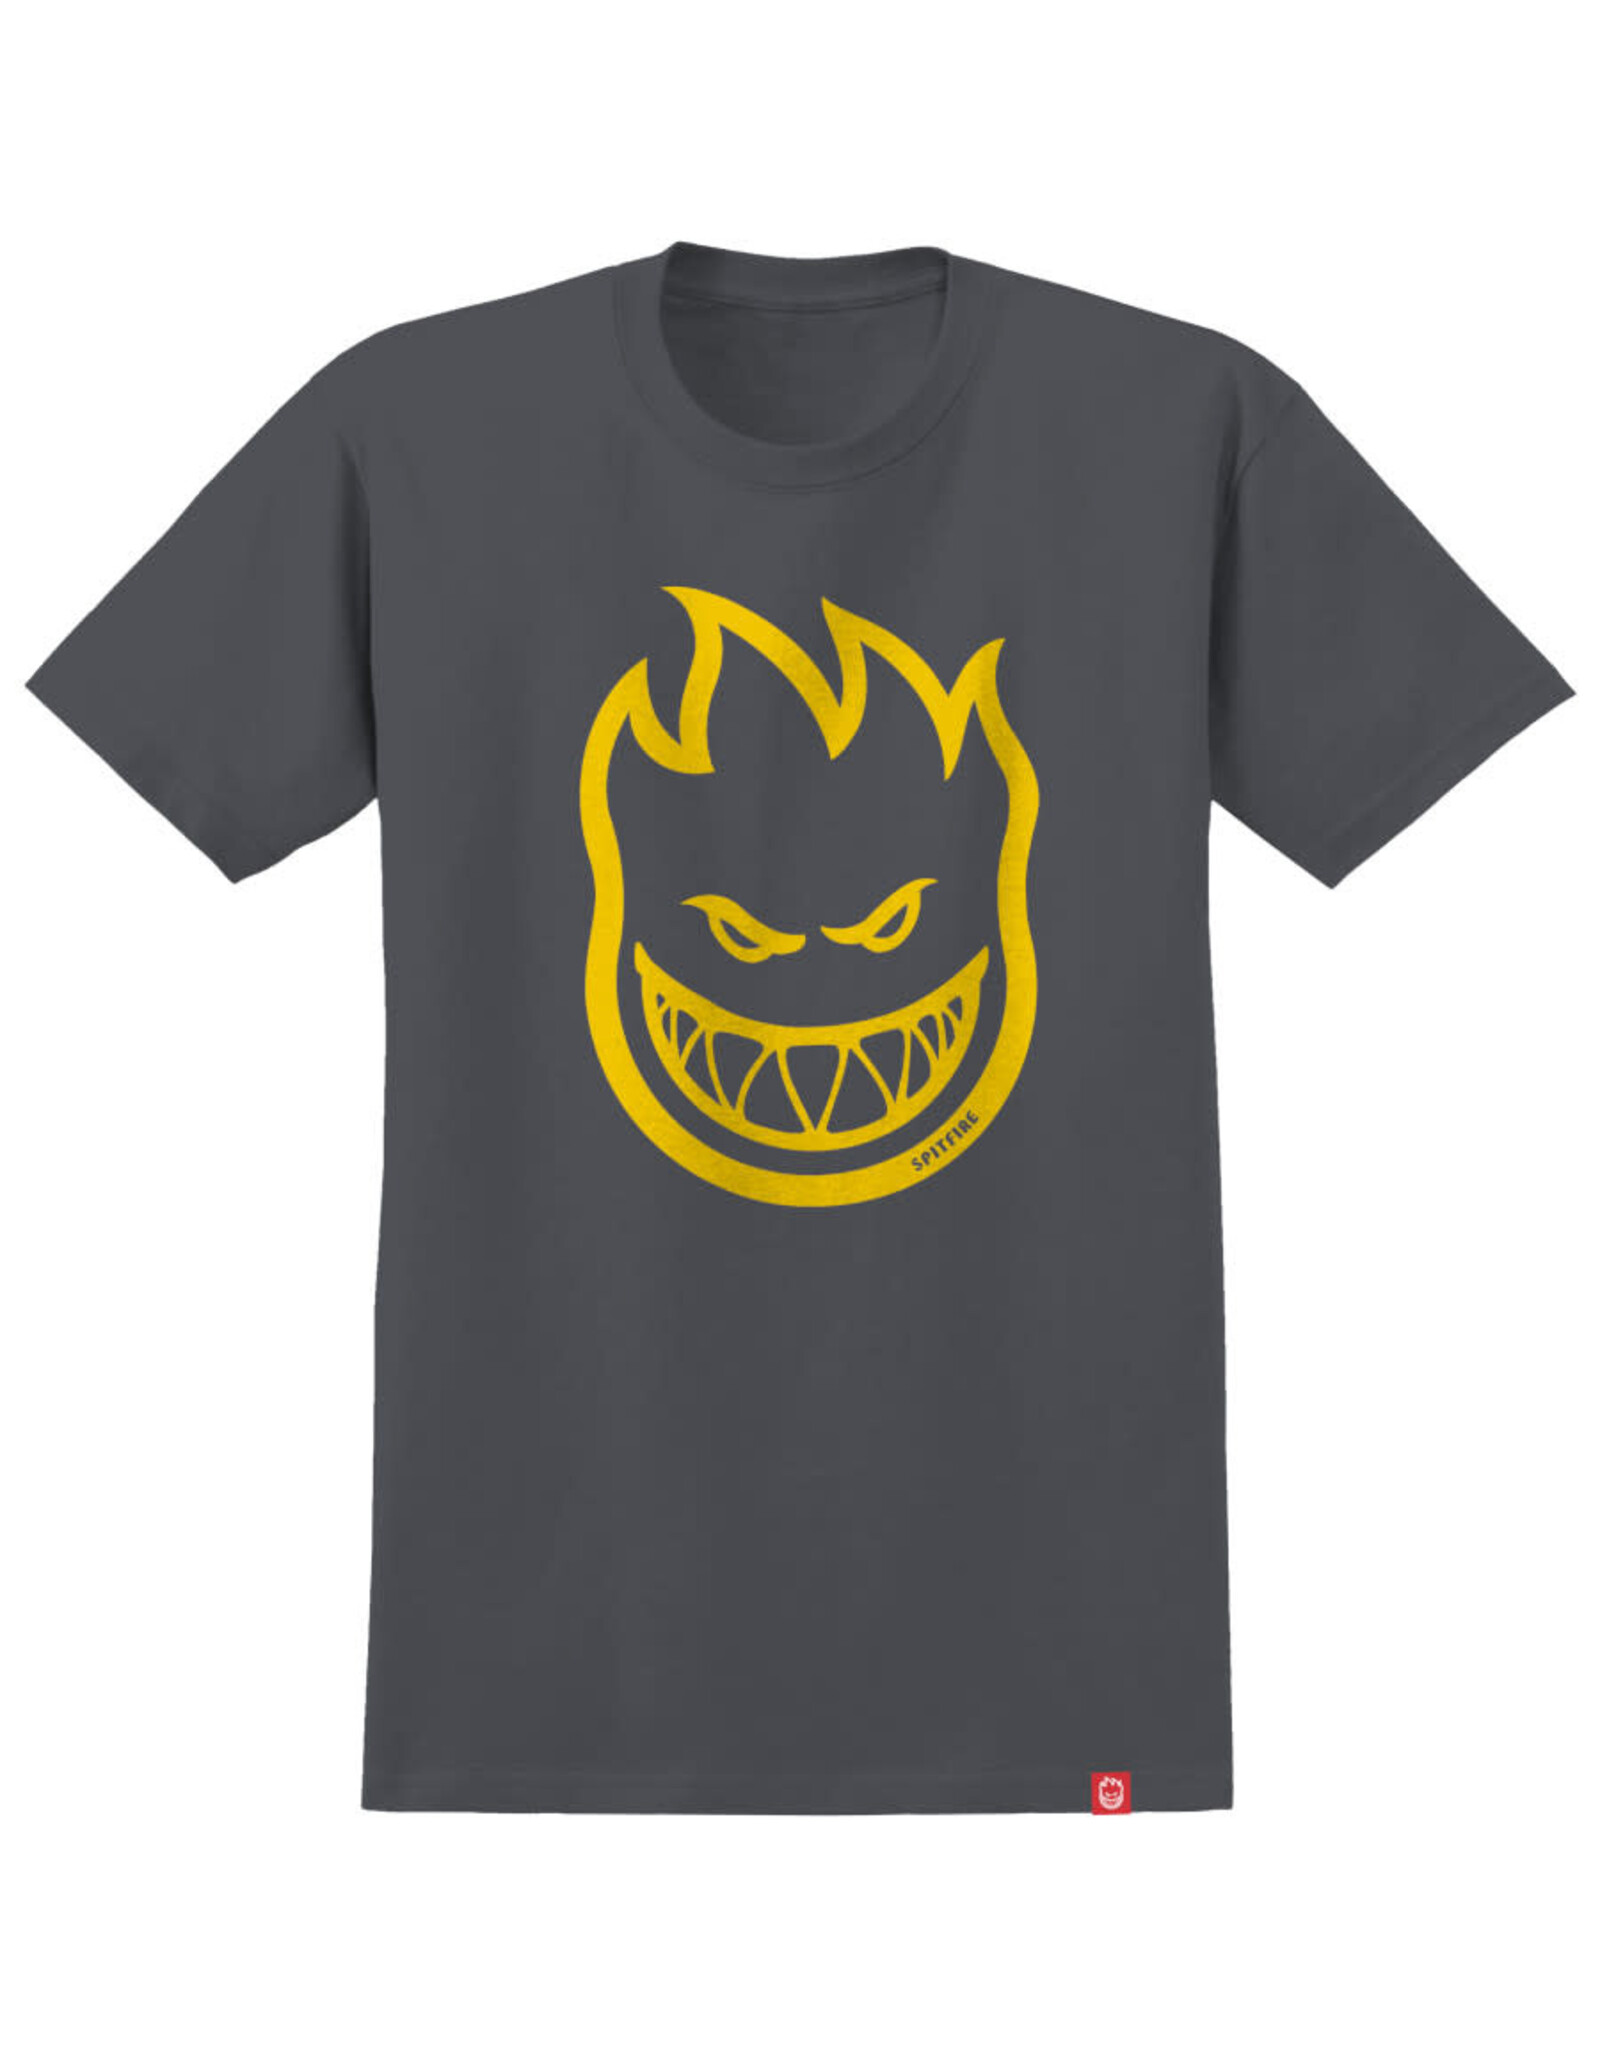 Spitfire Spitfire Tee Bighead Youth S/S (Charcoal/Yellow)